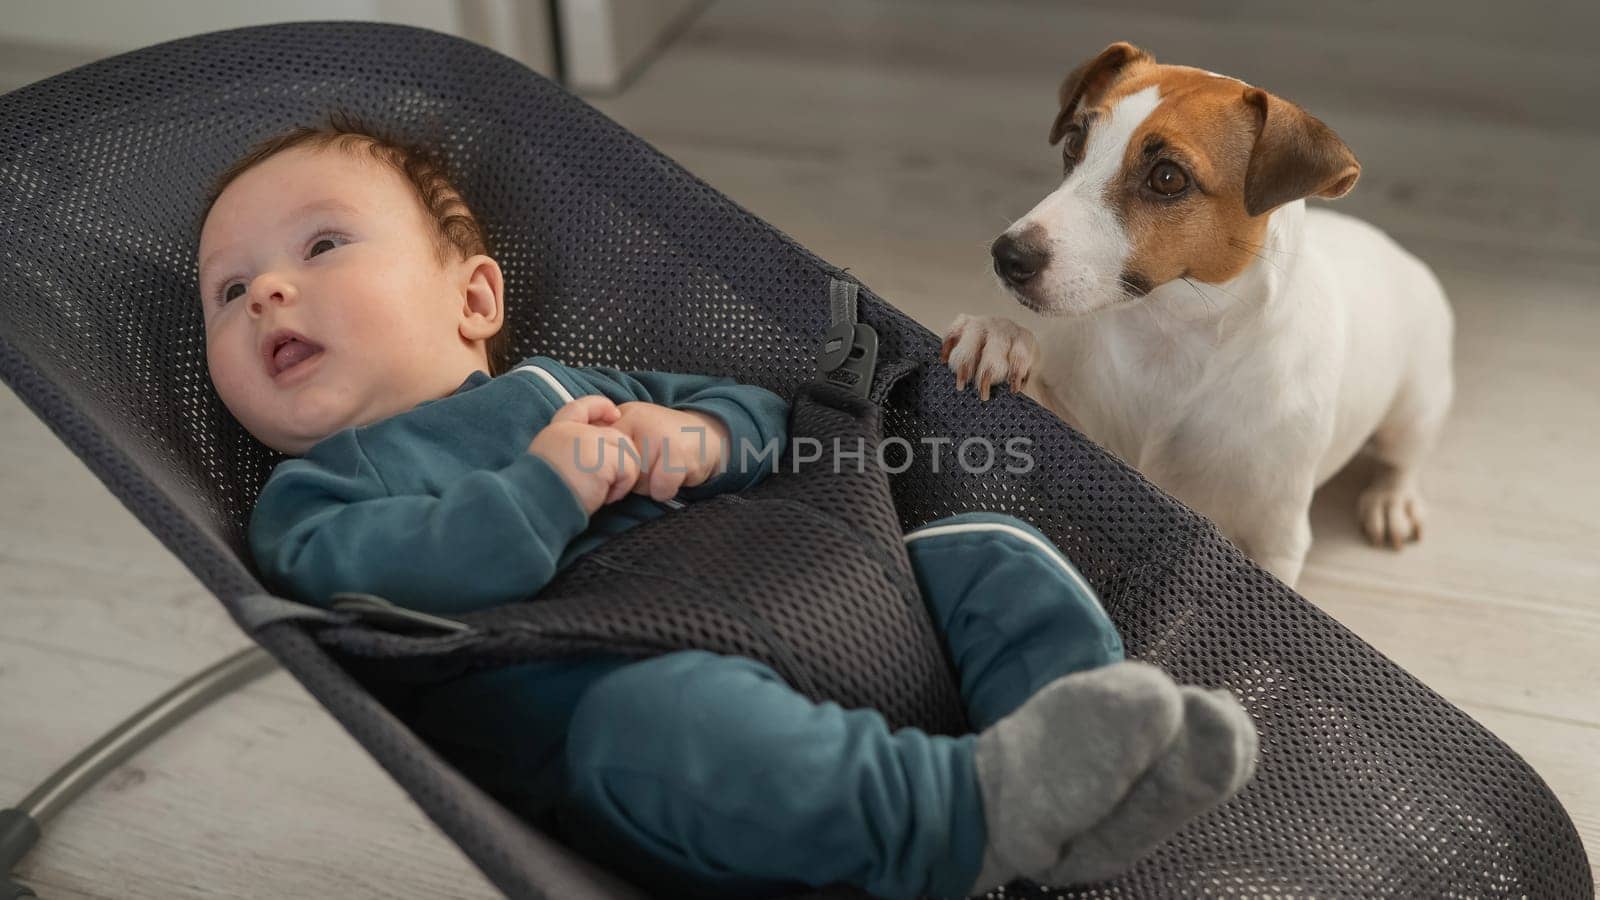 A dog sits next to a cute three-month-old boy dressed in a blue overalls in a baby lounger. by mrwed54